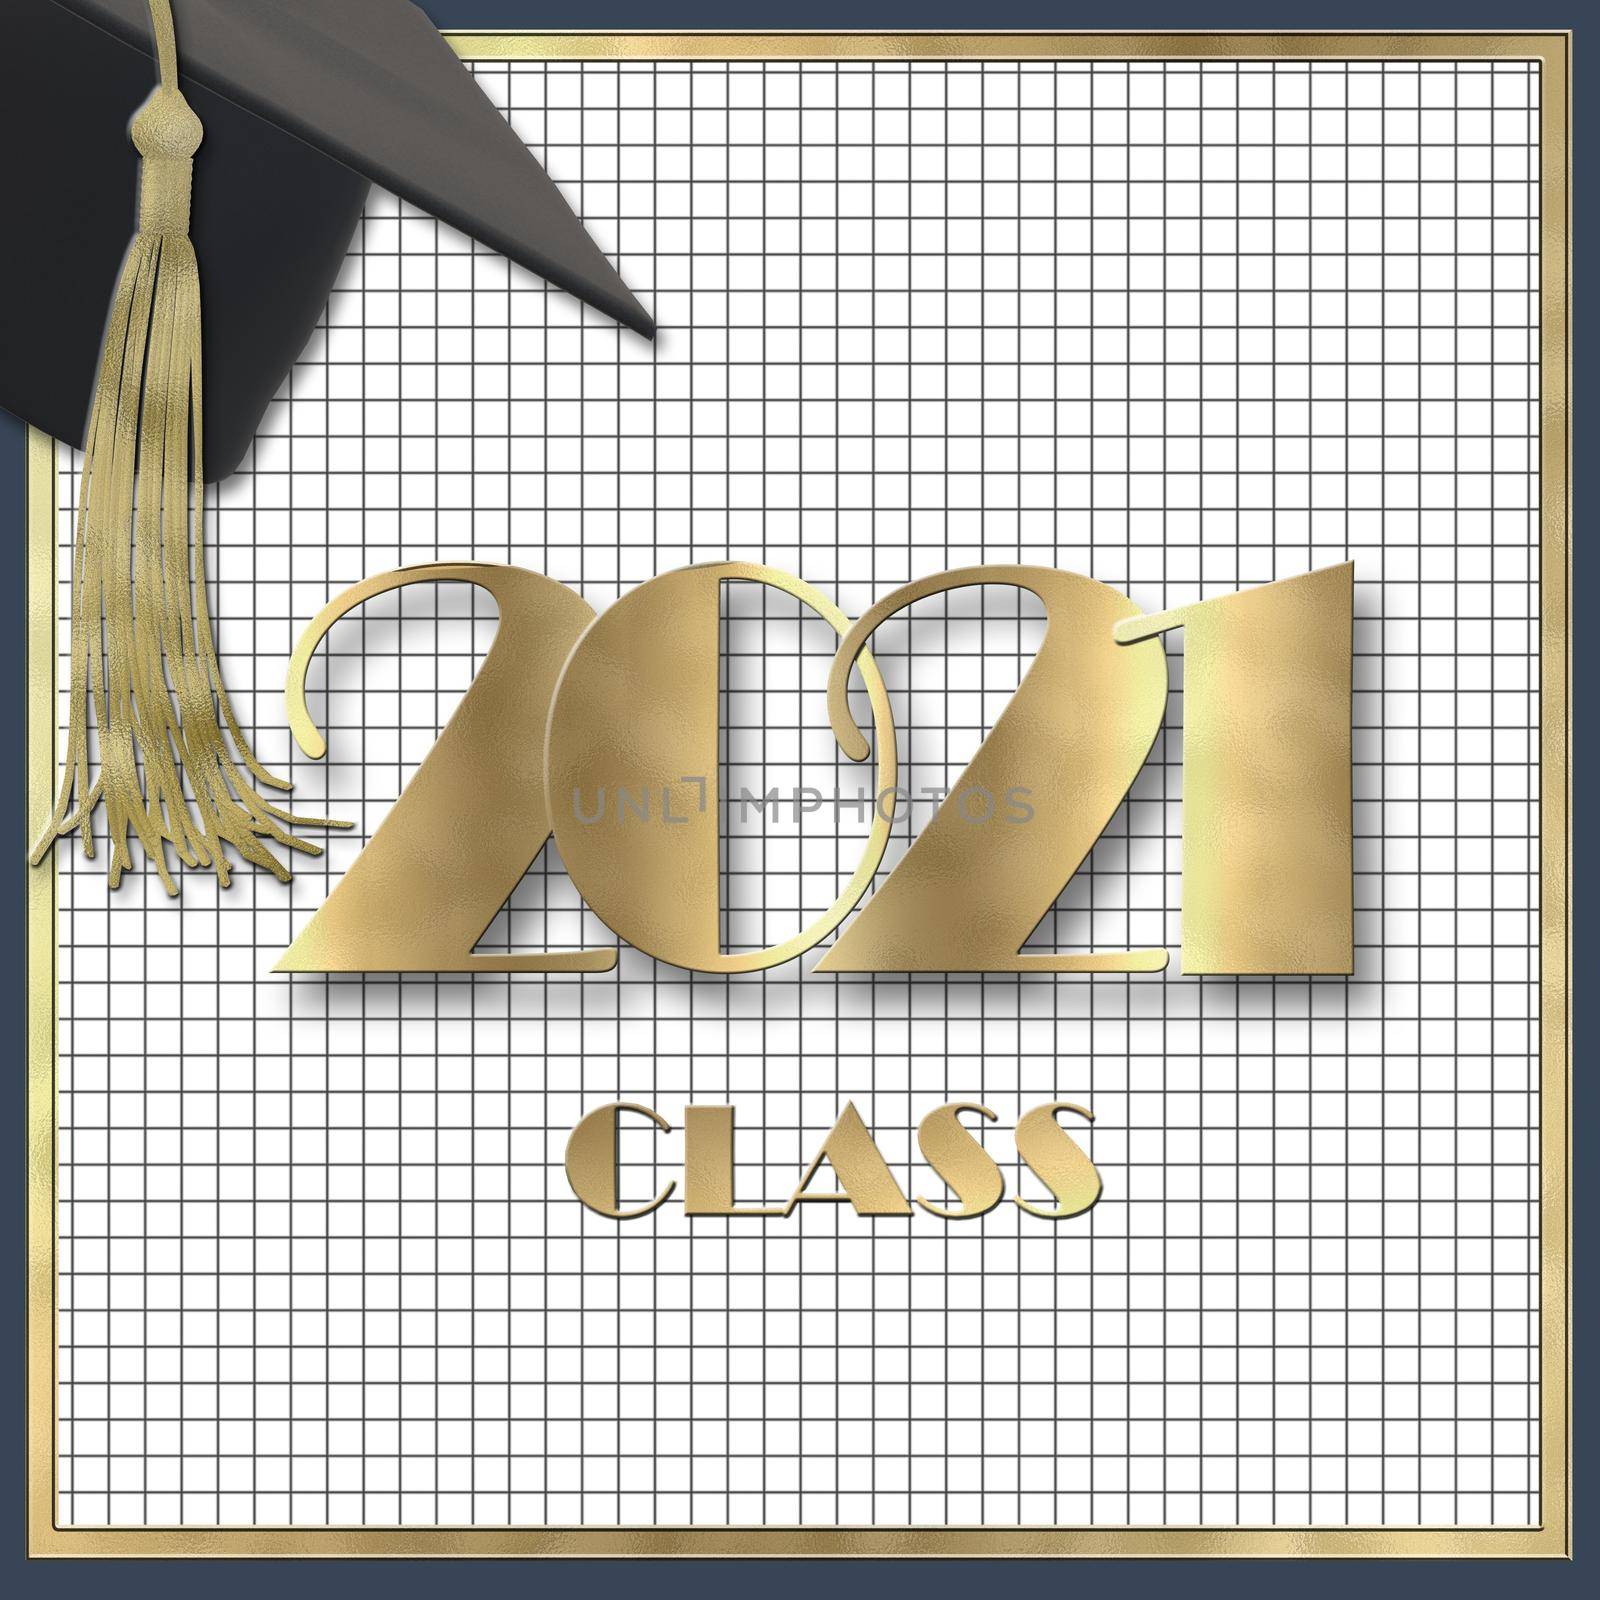 2021 class. Graduation 2021 cap with tassel. Class of 2021 year on squared graph grid paper. Education concept, isolated. Place for text, copy space. 3D illustration